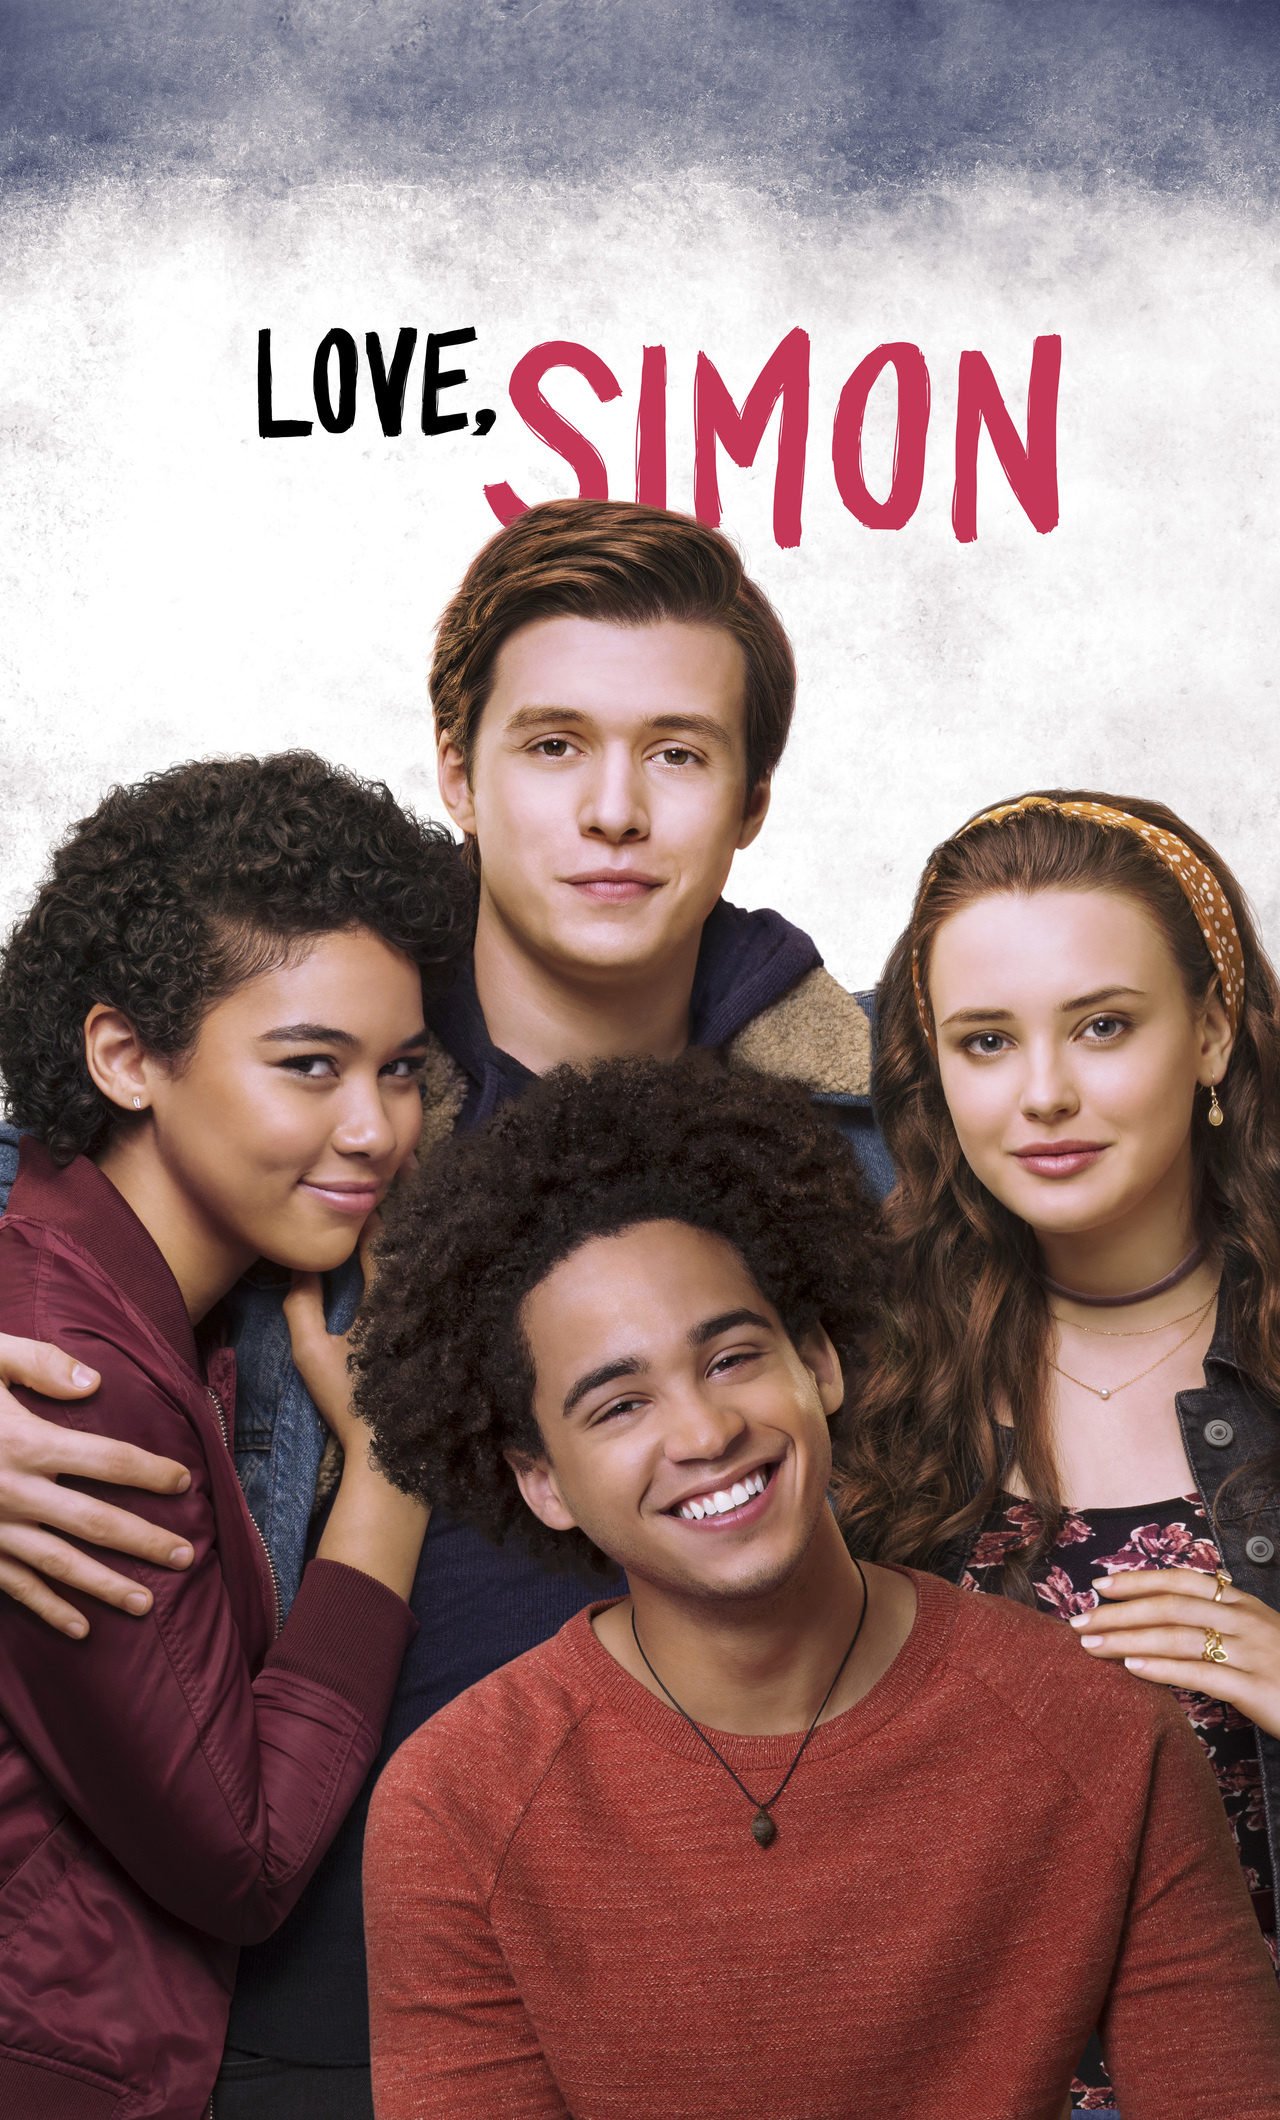 Love, Simon movie, Eye-catching wallpapers, Crystal-clear images, Stunning visuals, 1280x2120 HD Phone